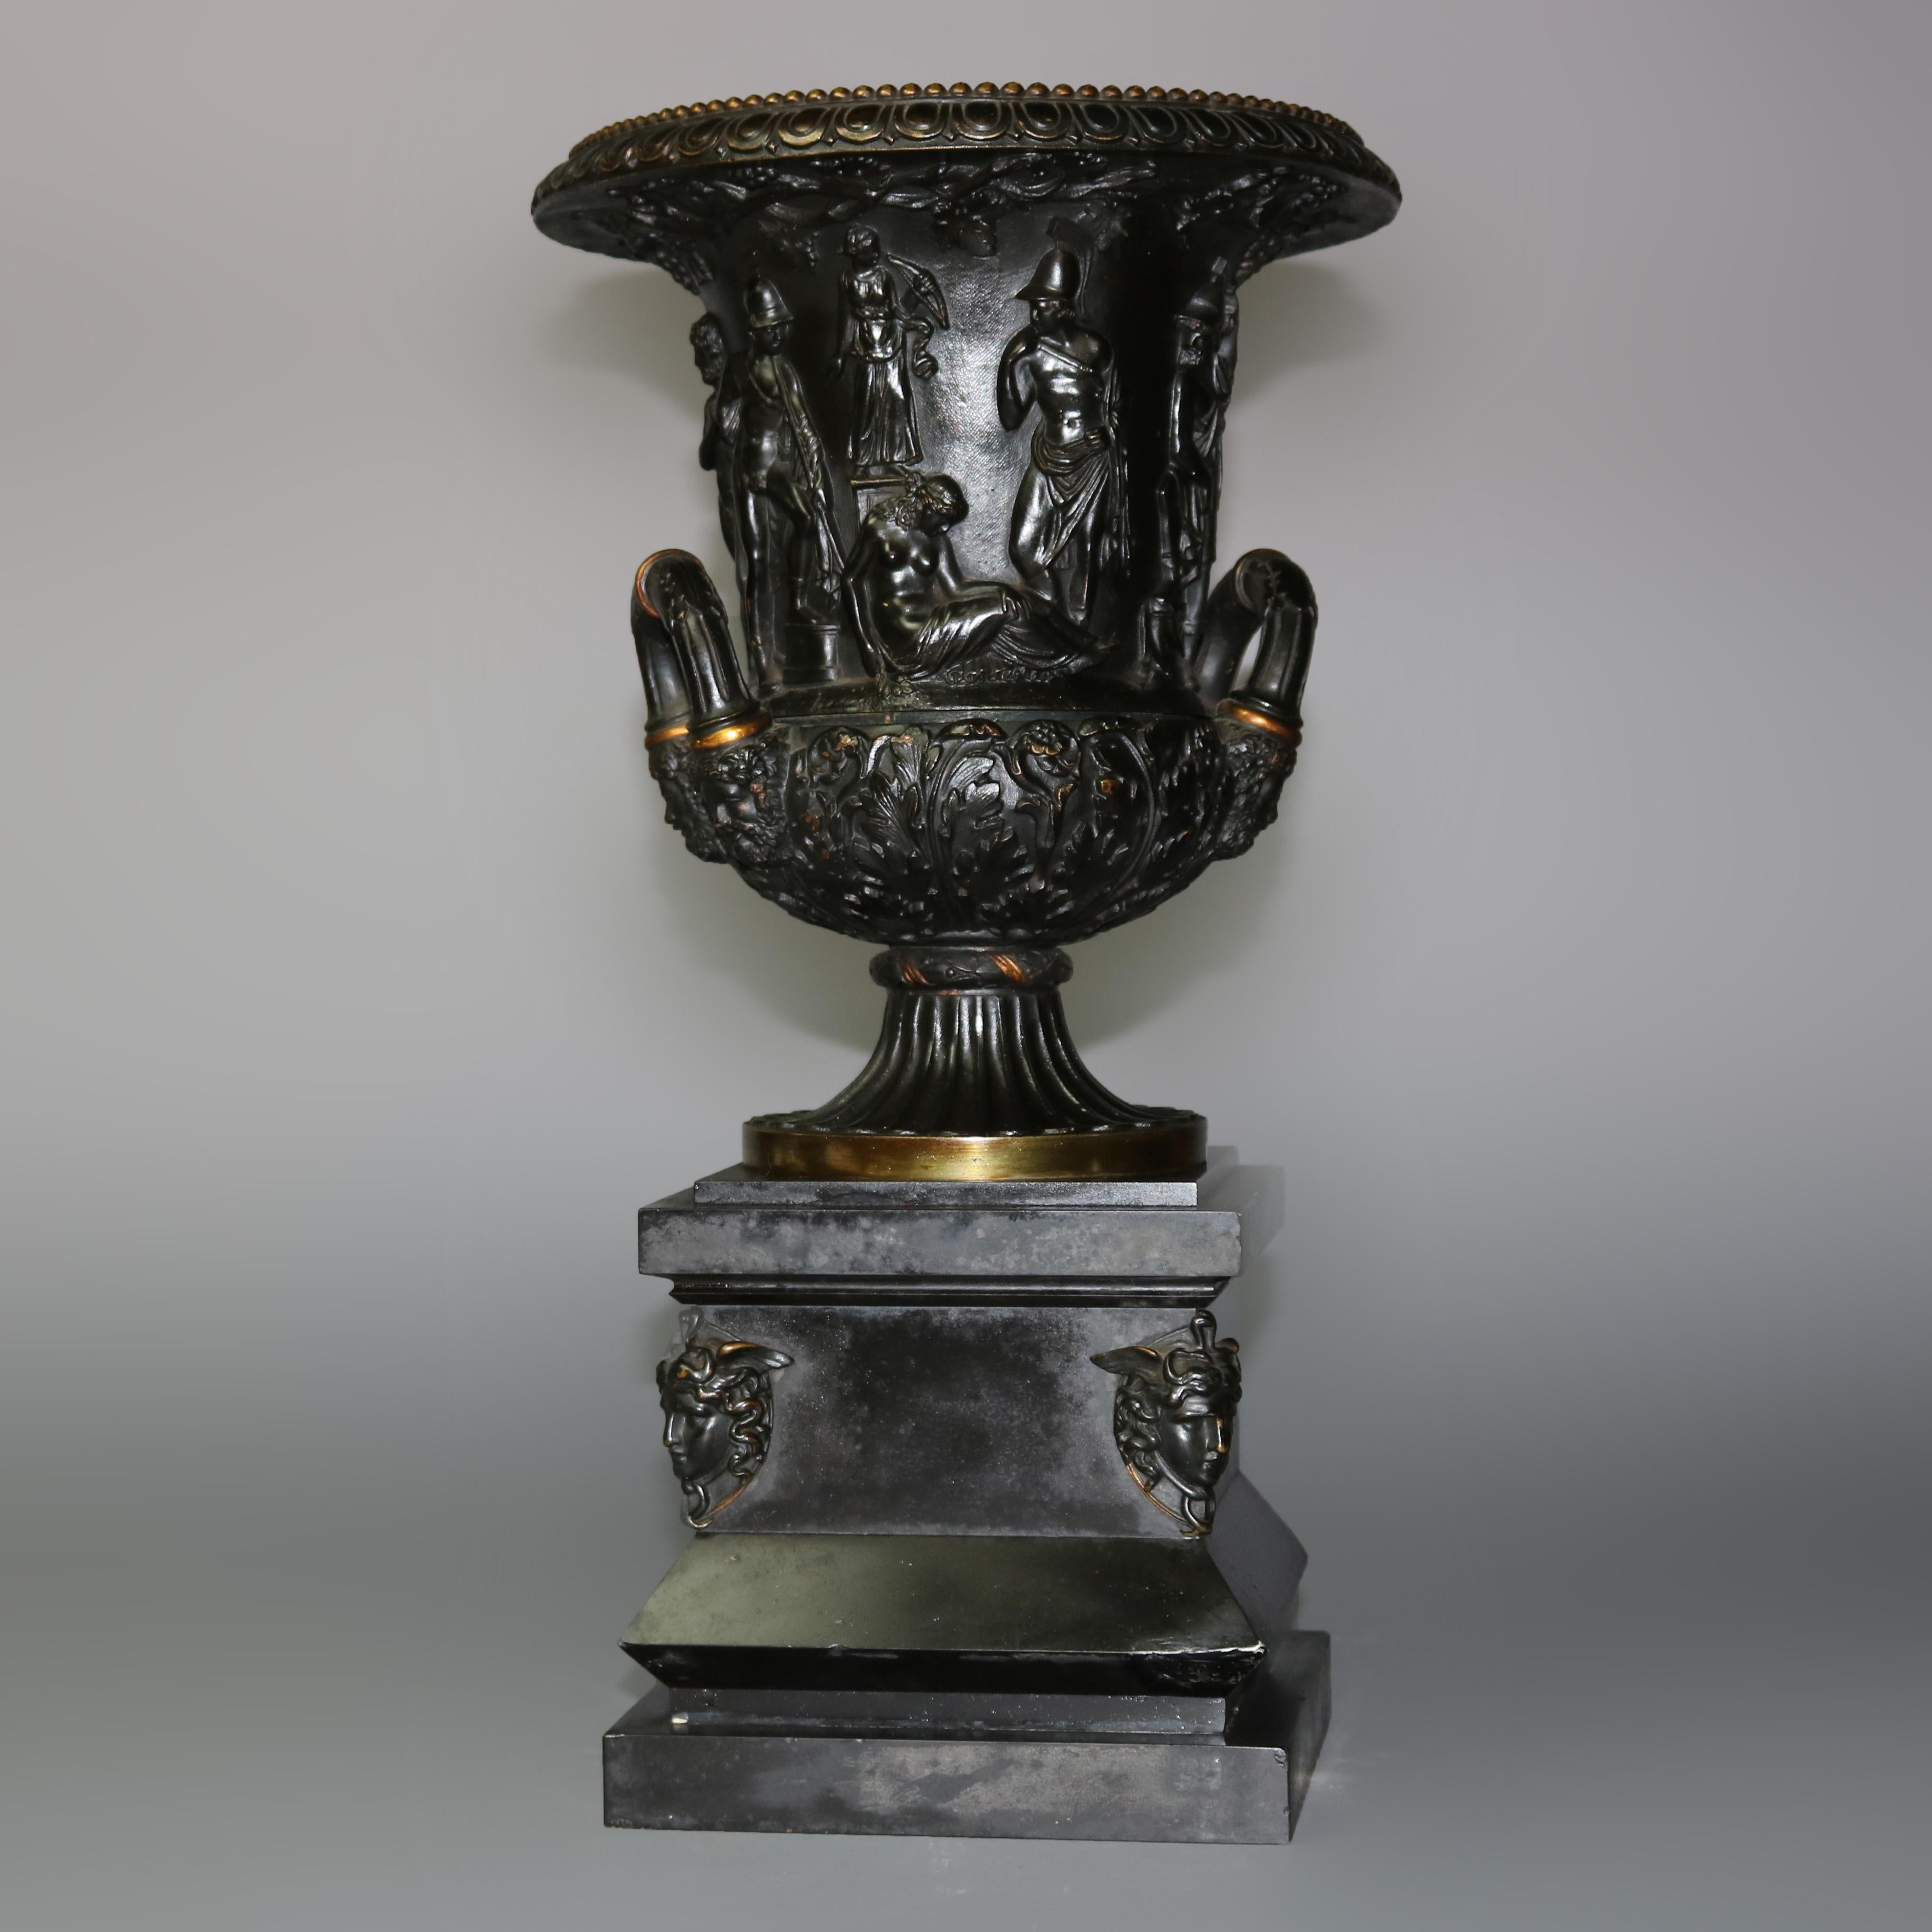 An antique pair of French neoclassical urns in the manner of Barbedienne offer crisply cast and parcel gilt bronze construction with high relief figures and foliate decoration, double handles, raised on a fluted plinth and seated on stepped base